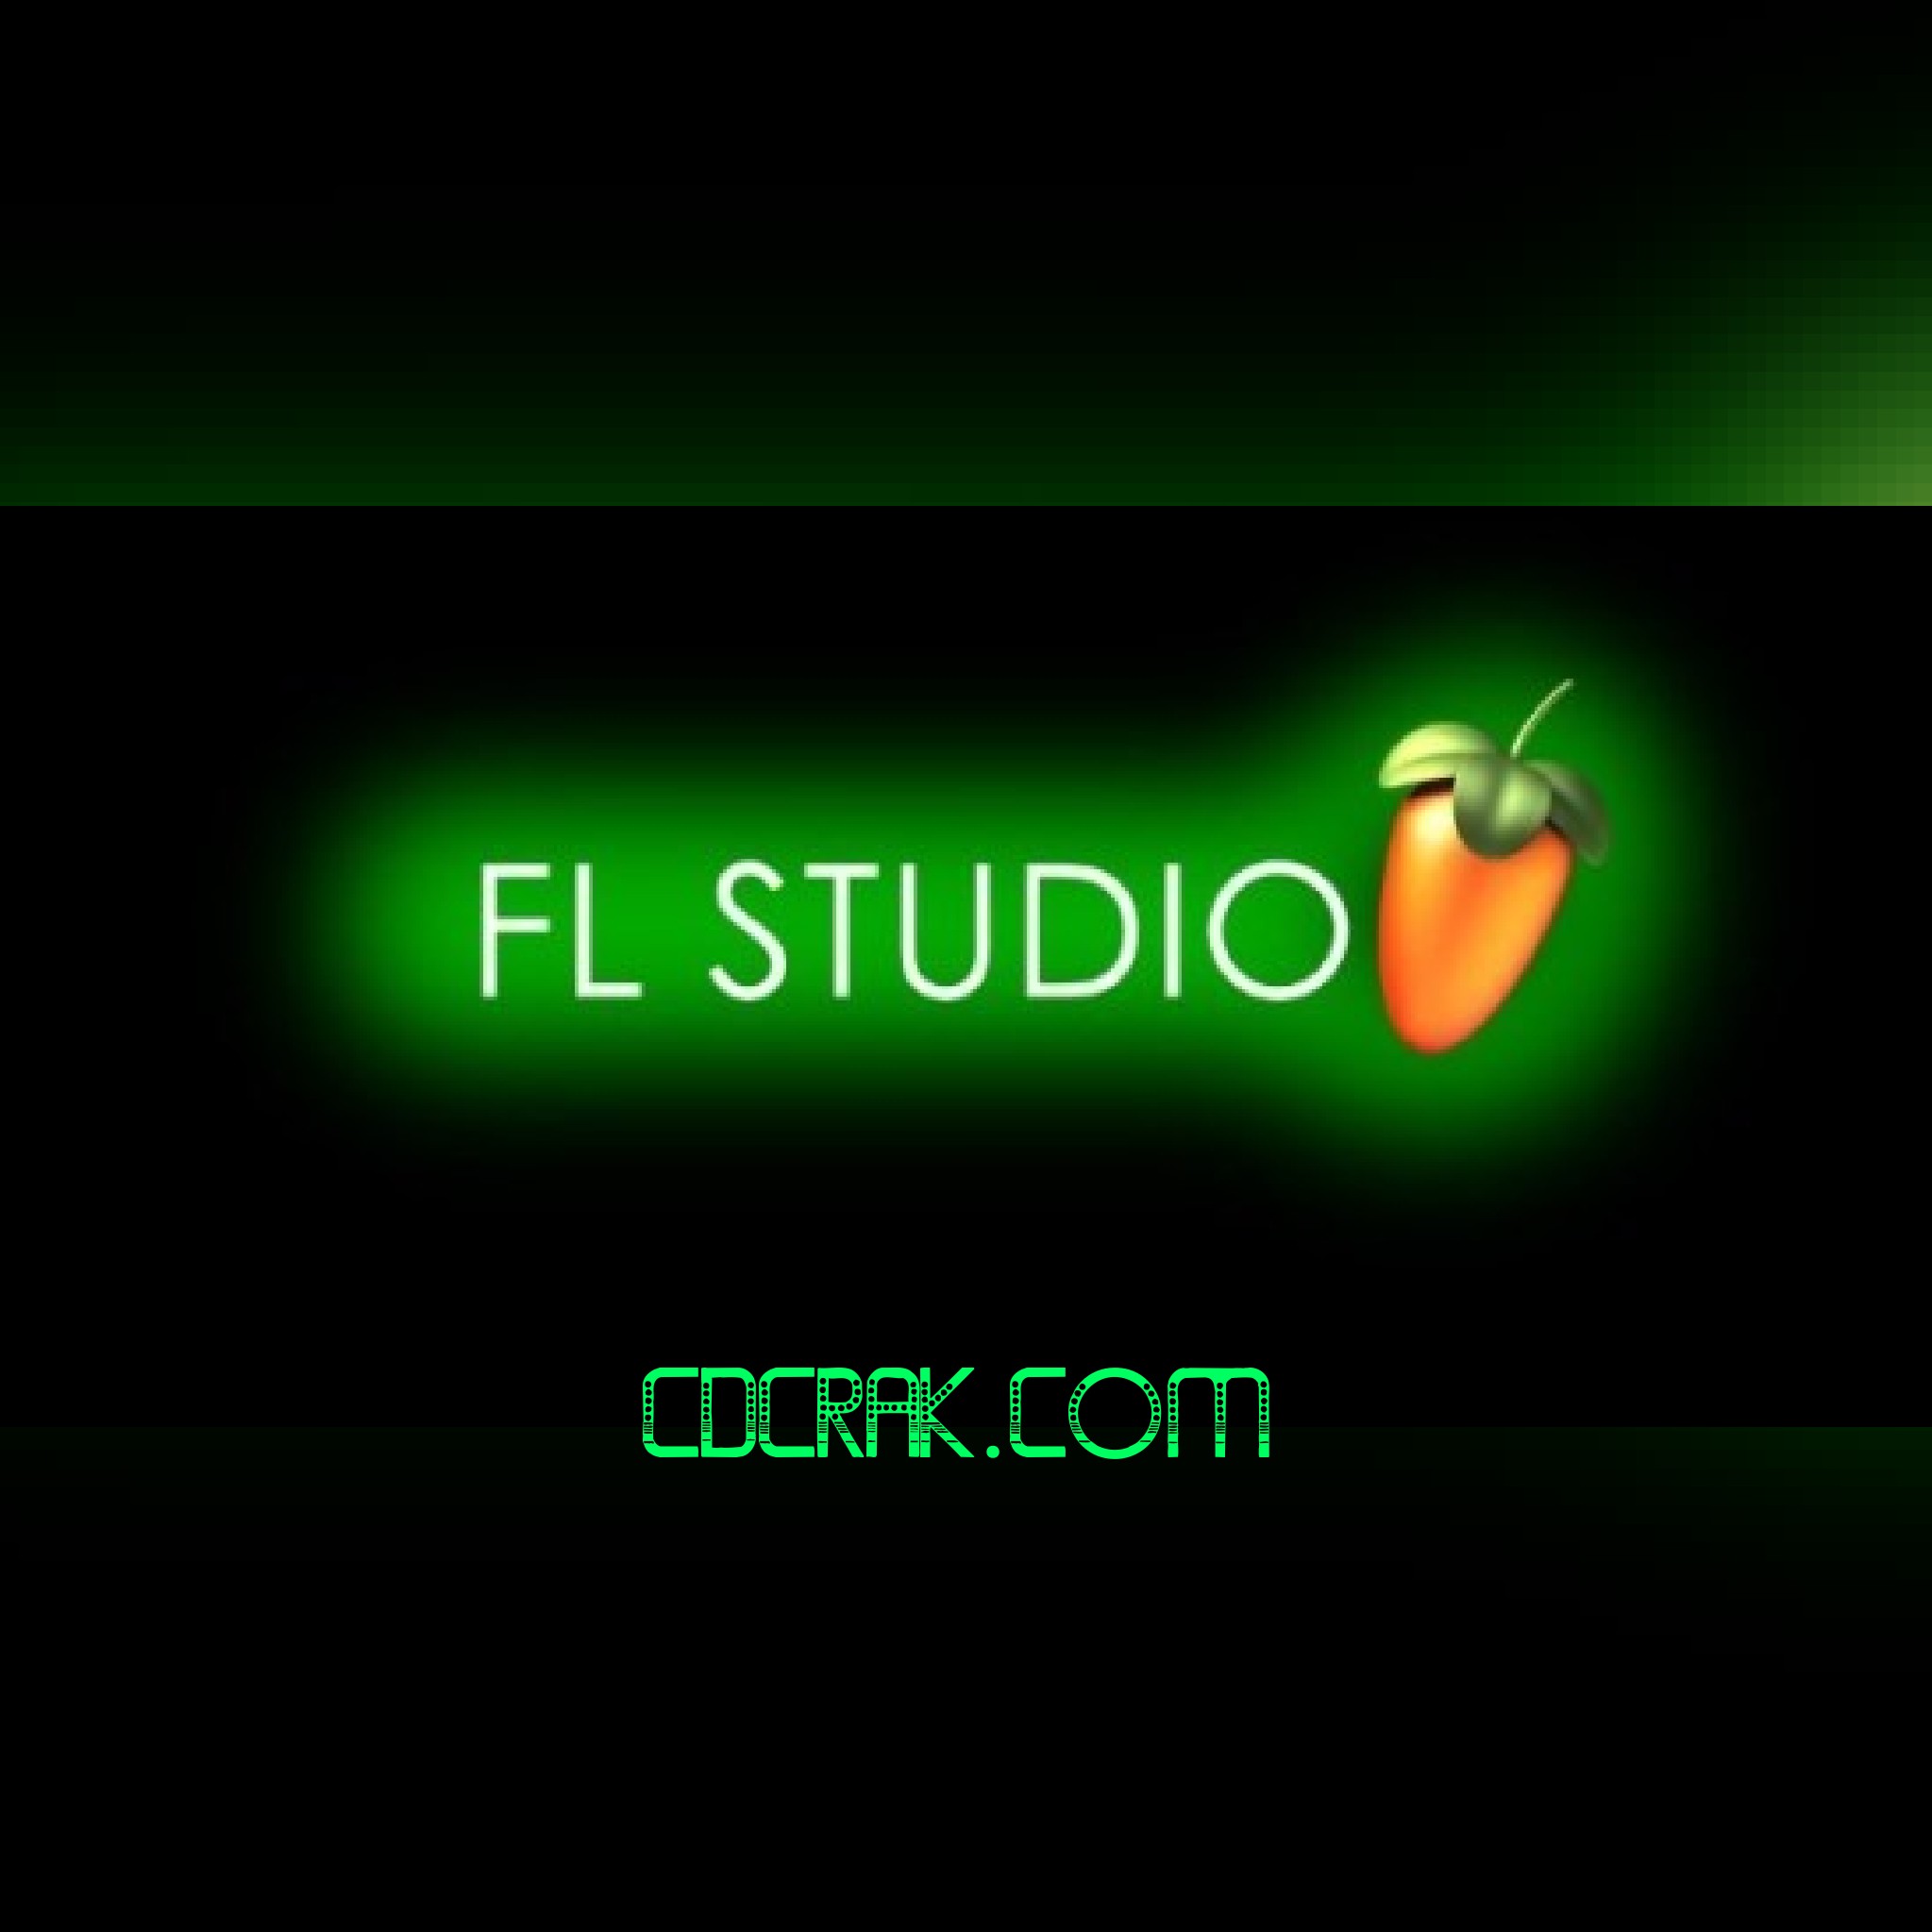 Fruity loops for mac free download